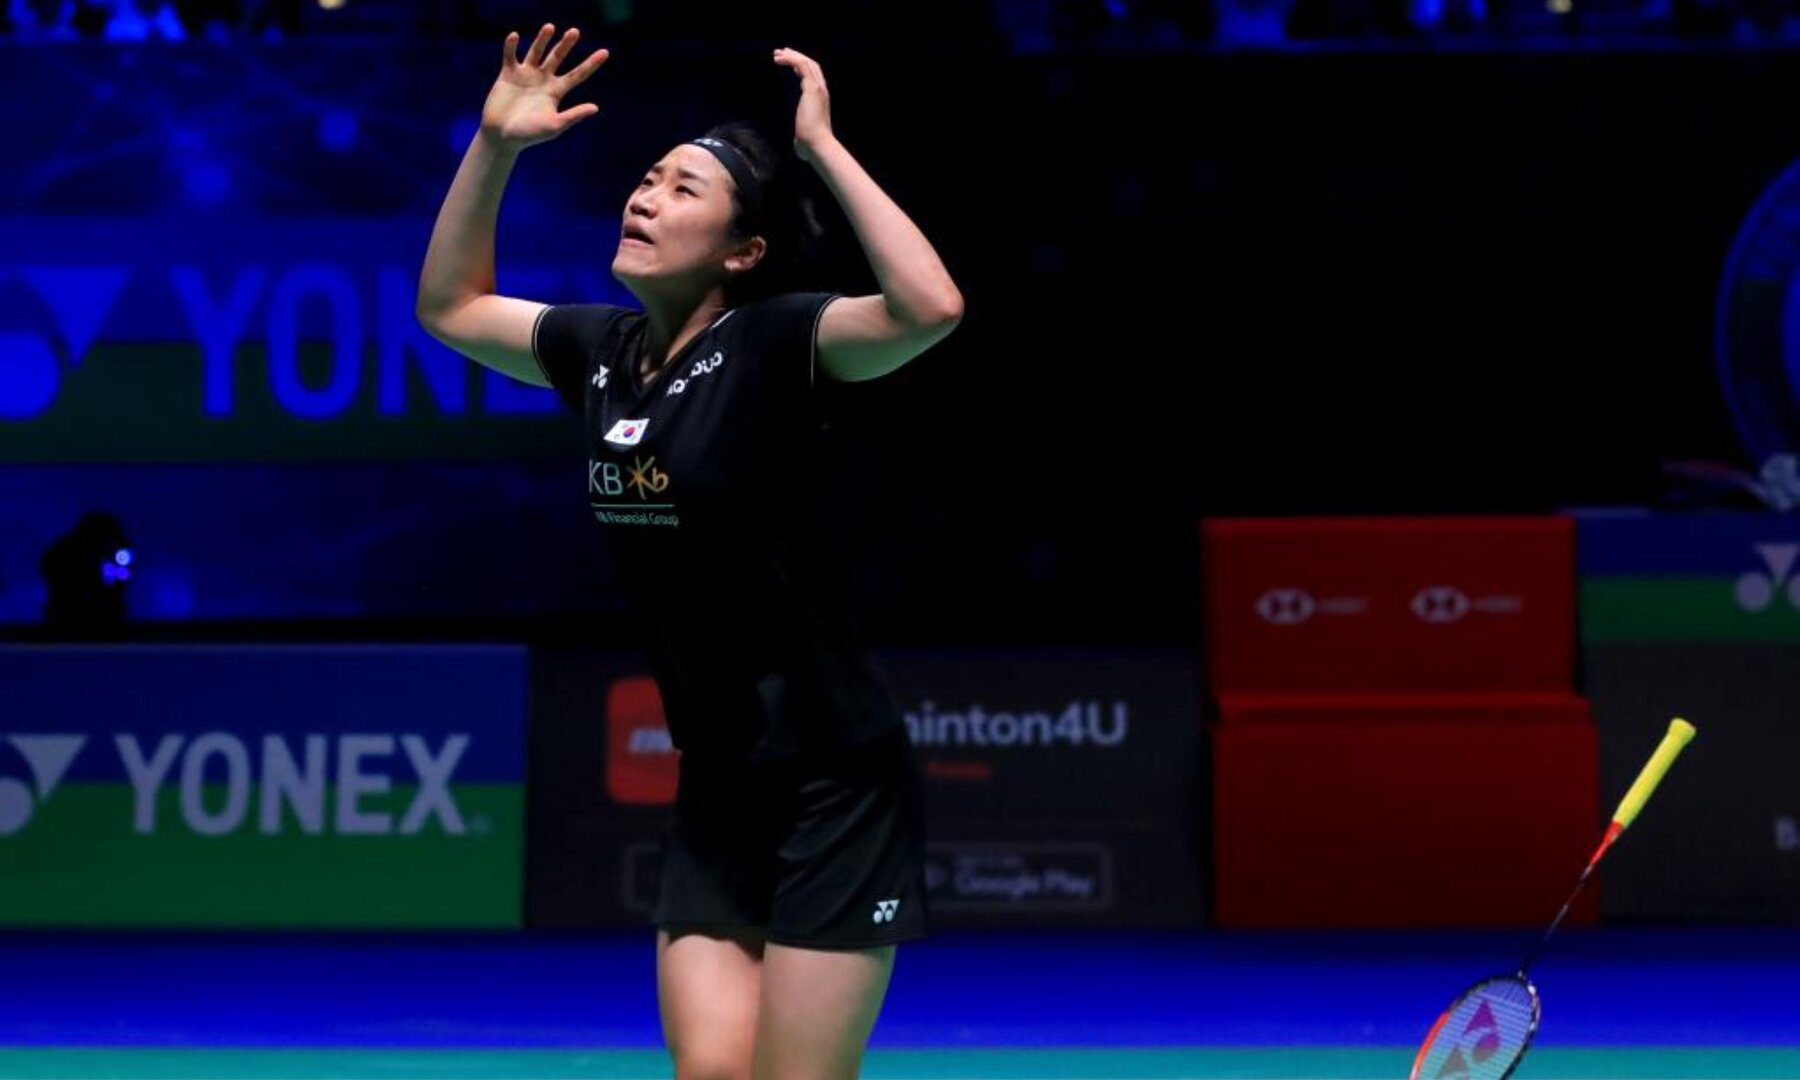 An Se-young wins Korea's first badminton women's singles title in